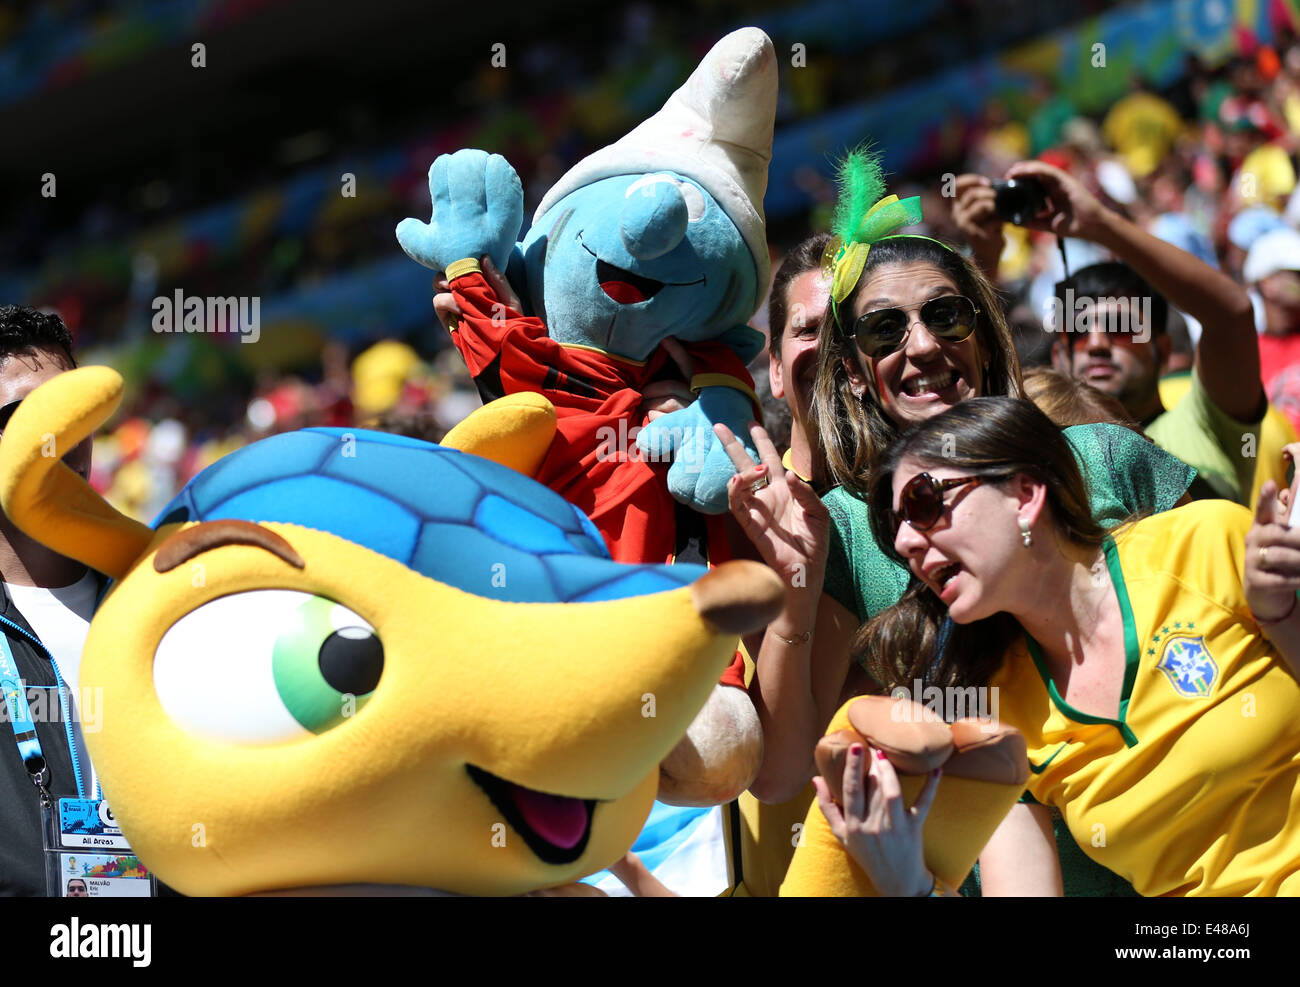 Brasilia, Brazil. 5th July, 2014. Football fans pose with mascot Fuleco prior to a quarter-finals match between Argentina and Belgium of 2014 FIFA World Cup at the Estadio Nacional Stadium in Brasilia, Brazil, on July 5, 2014. Credit:  Li Ming/Xinhua/Alamy Live News Stock Photo